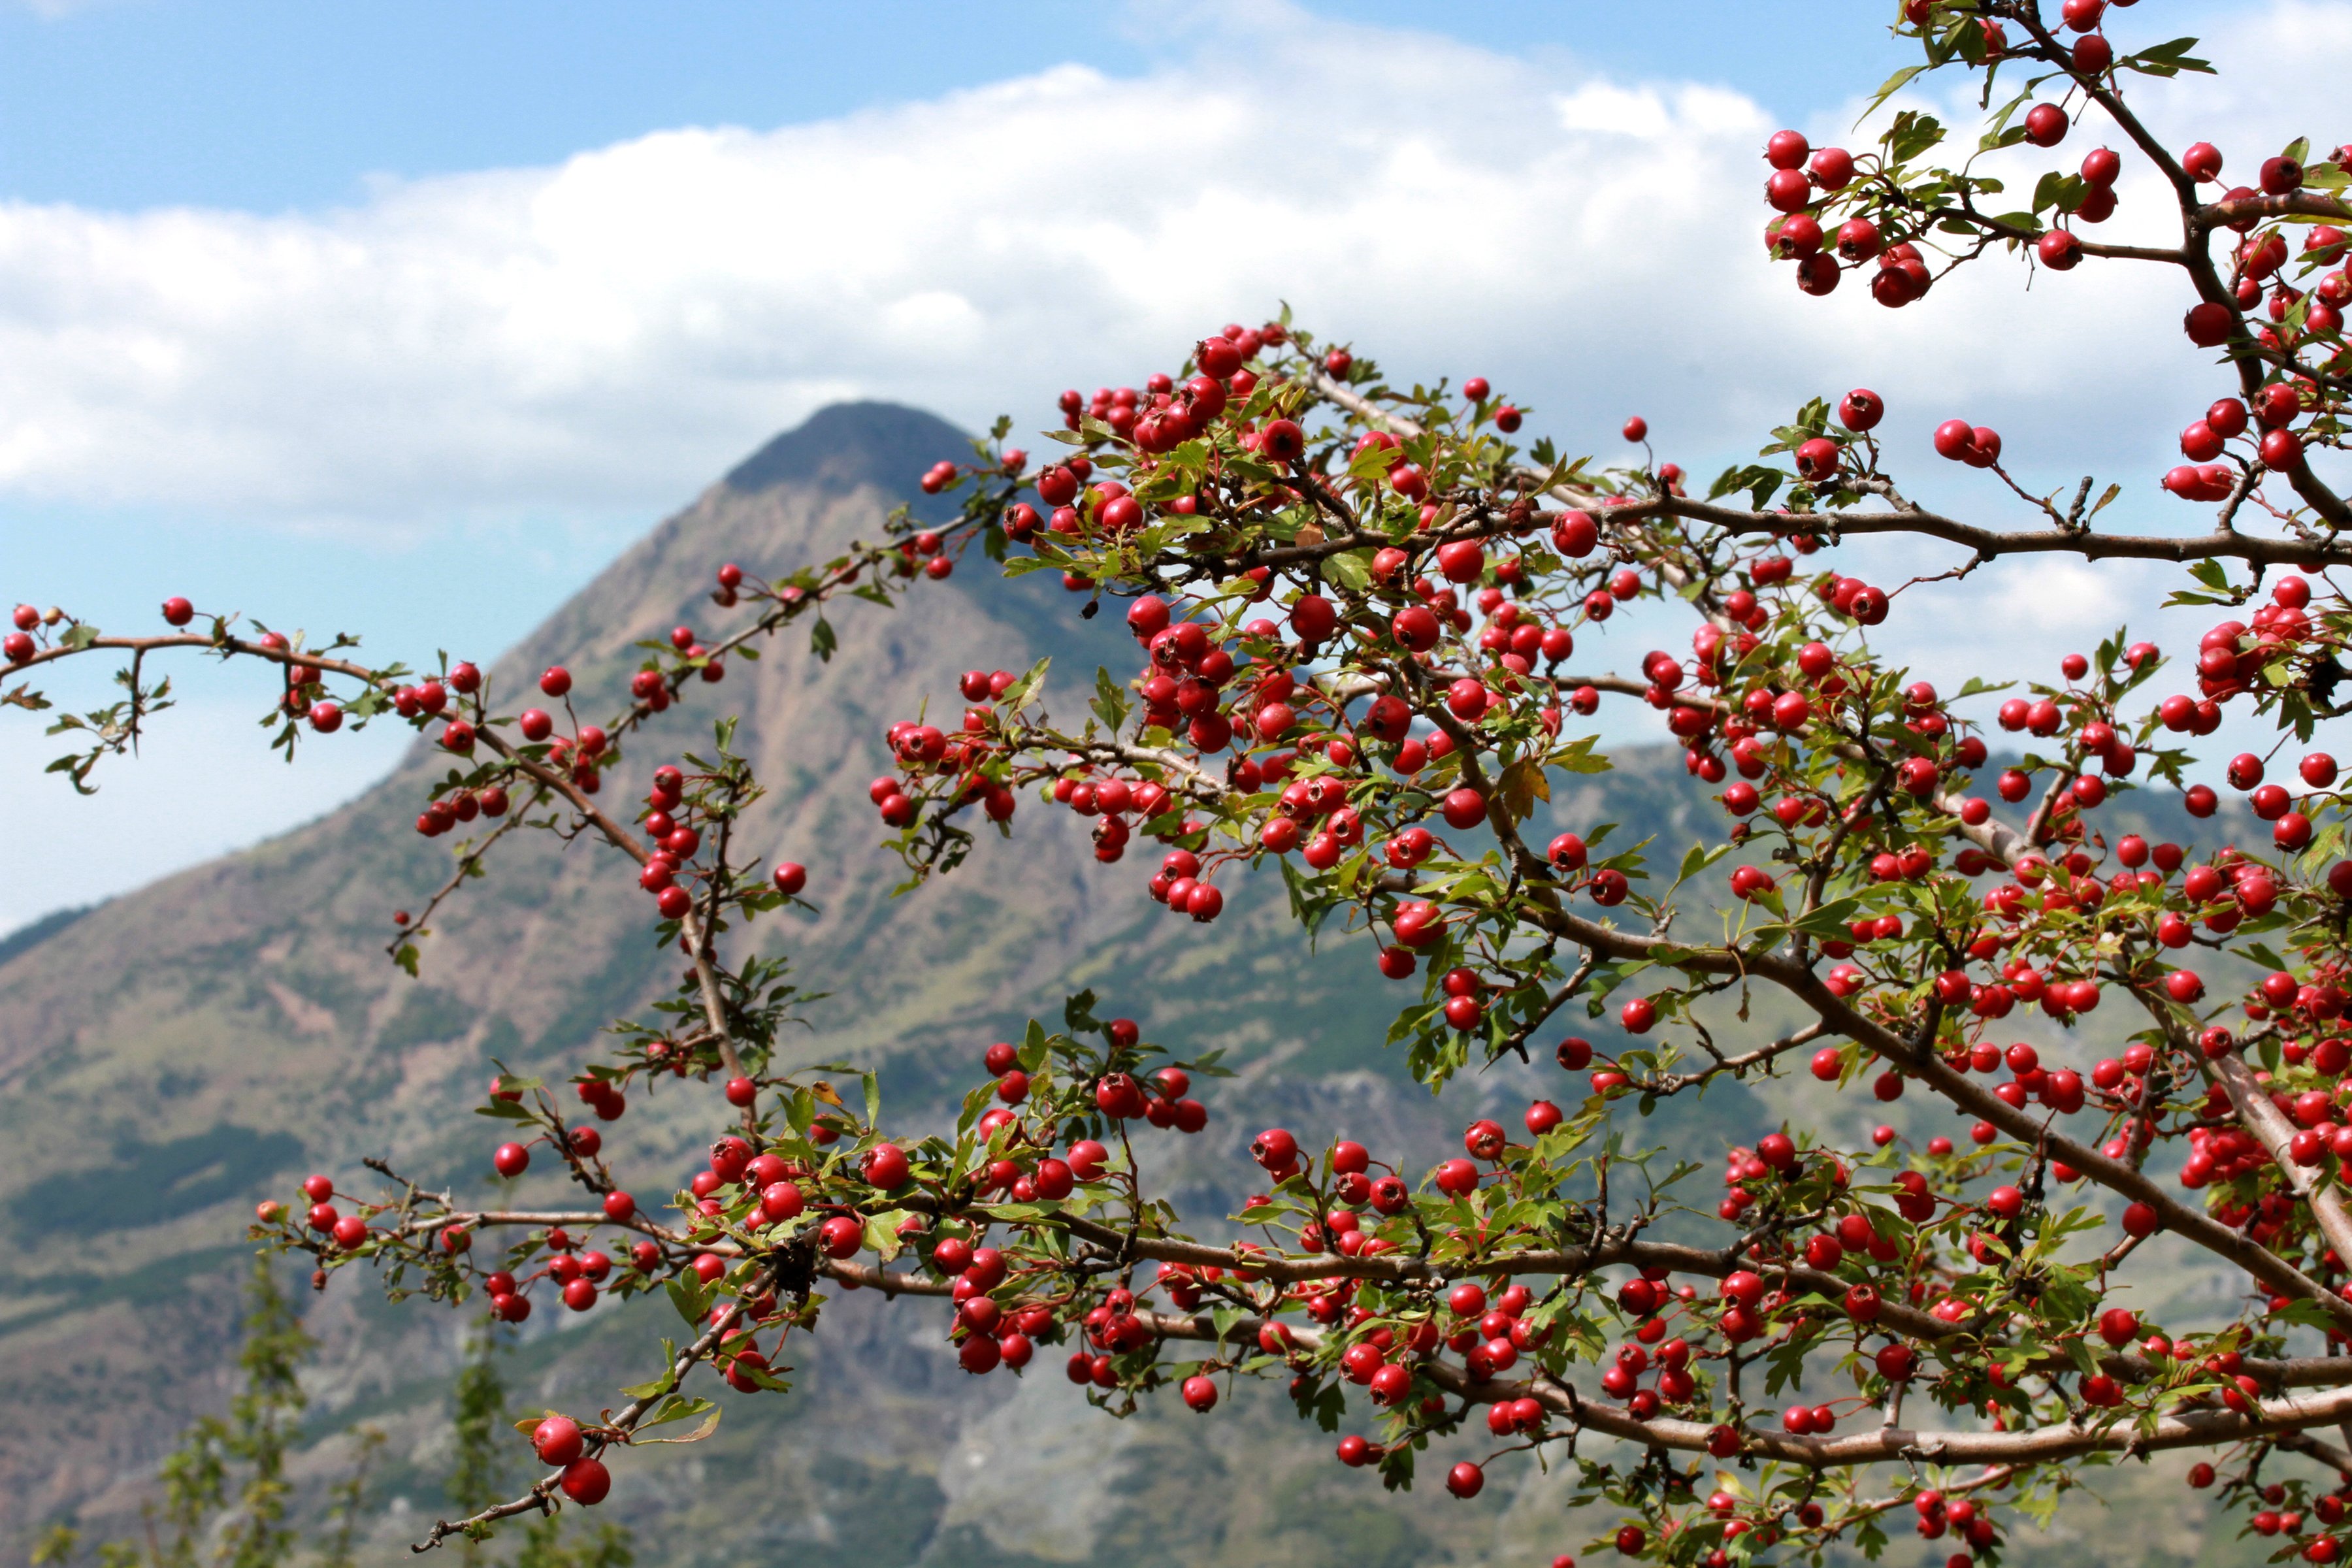 A colorful bush filled with rosehips sits in the foreground while a looming mountain peeks through under the clouds in Albania.